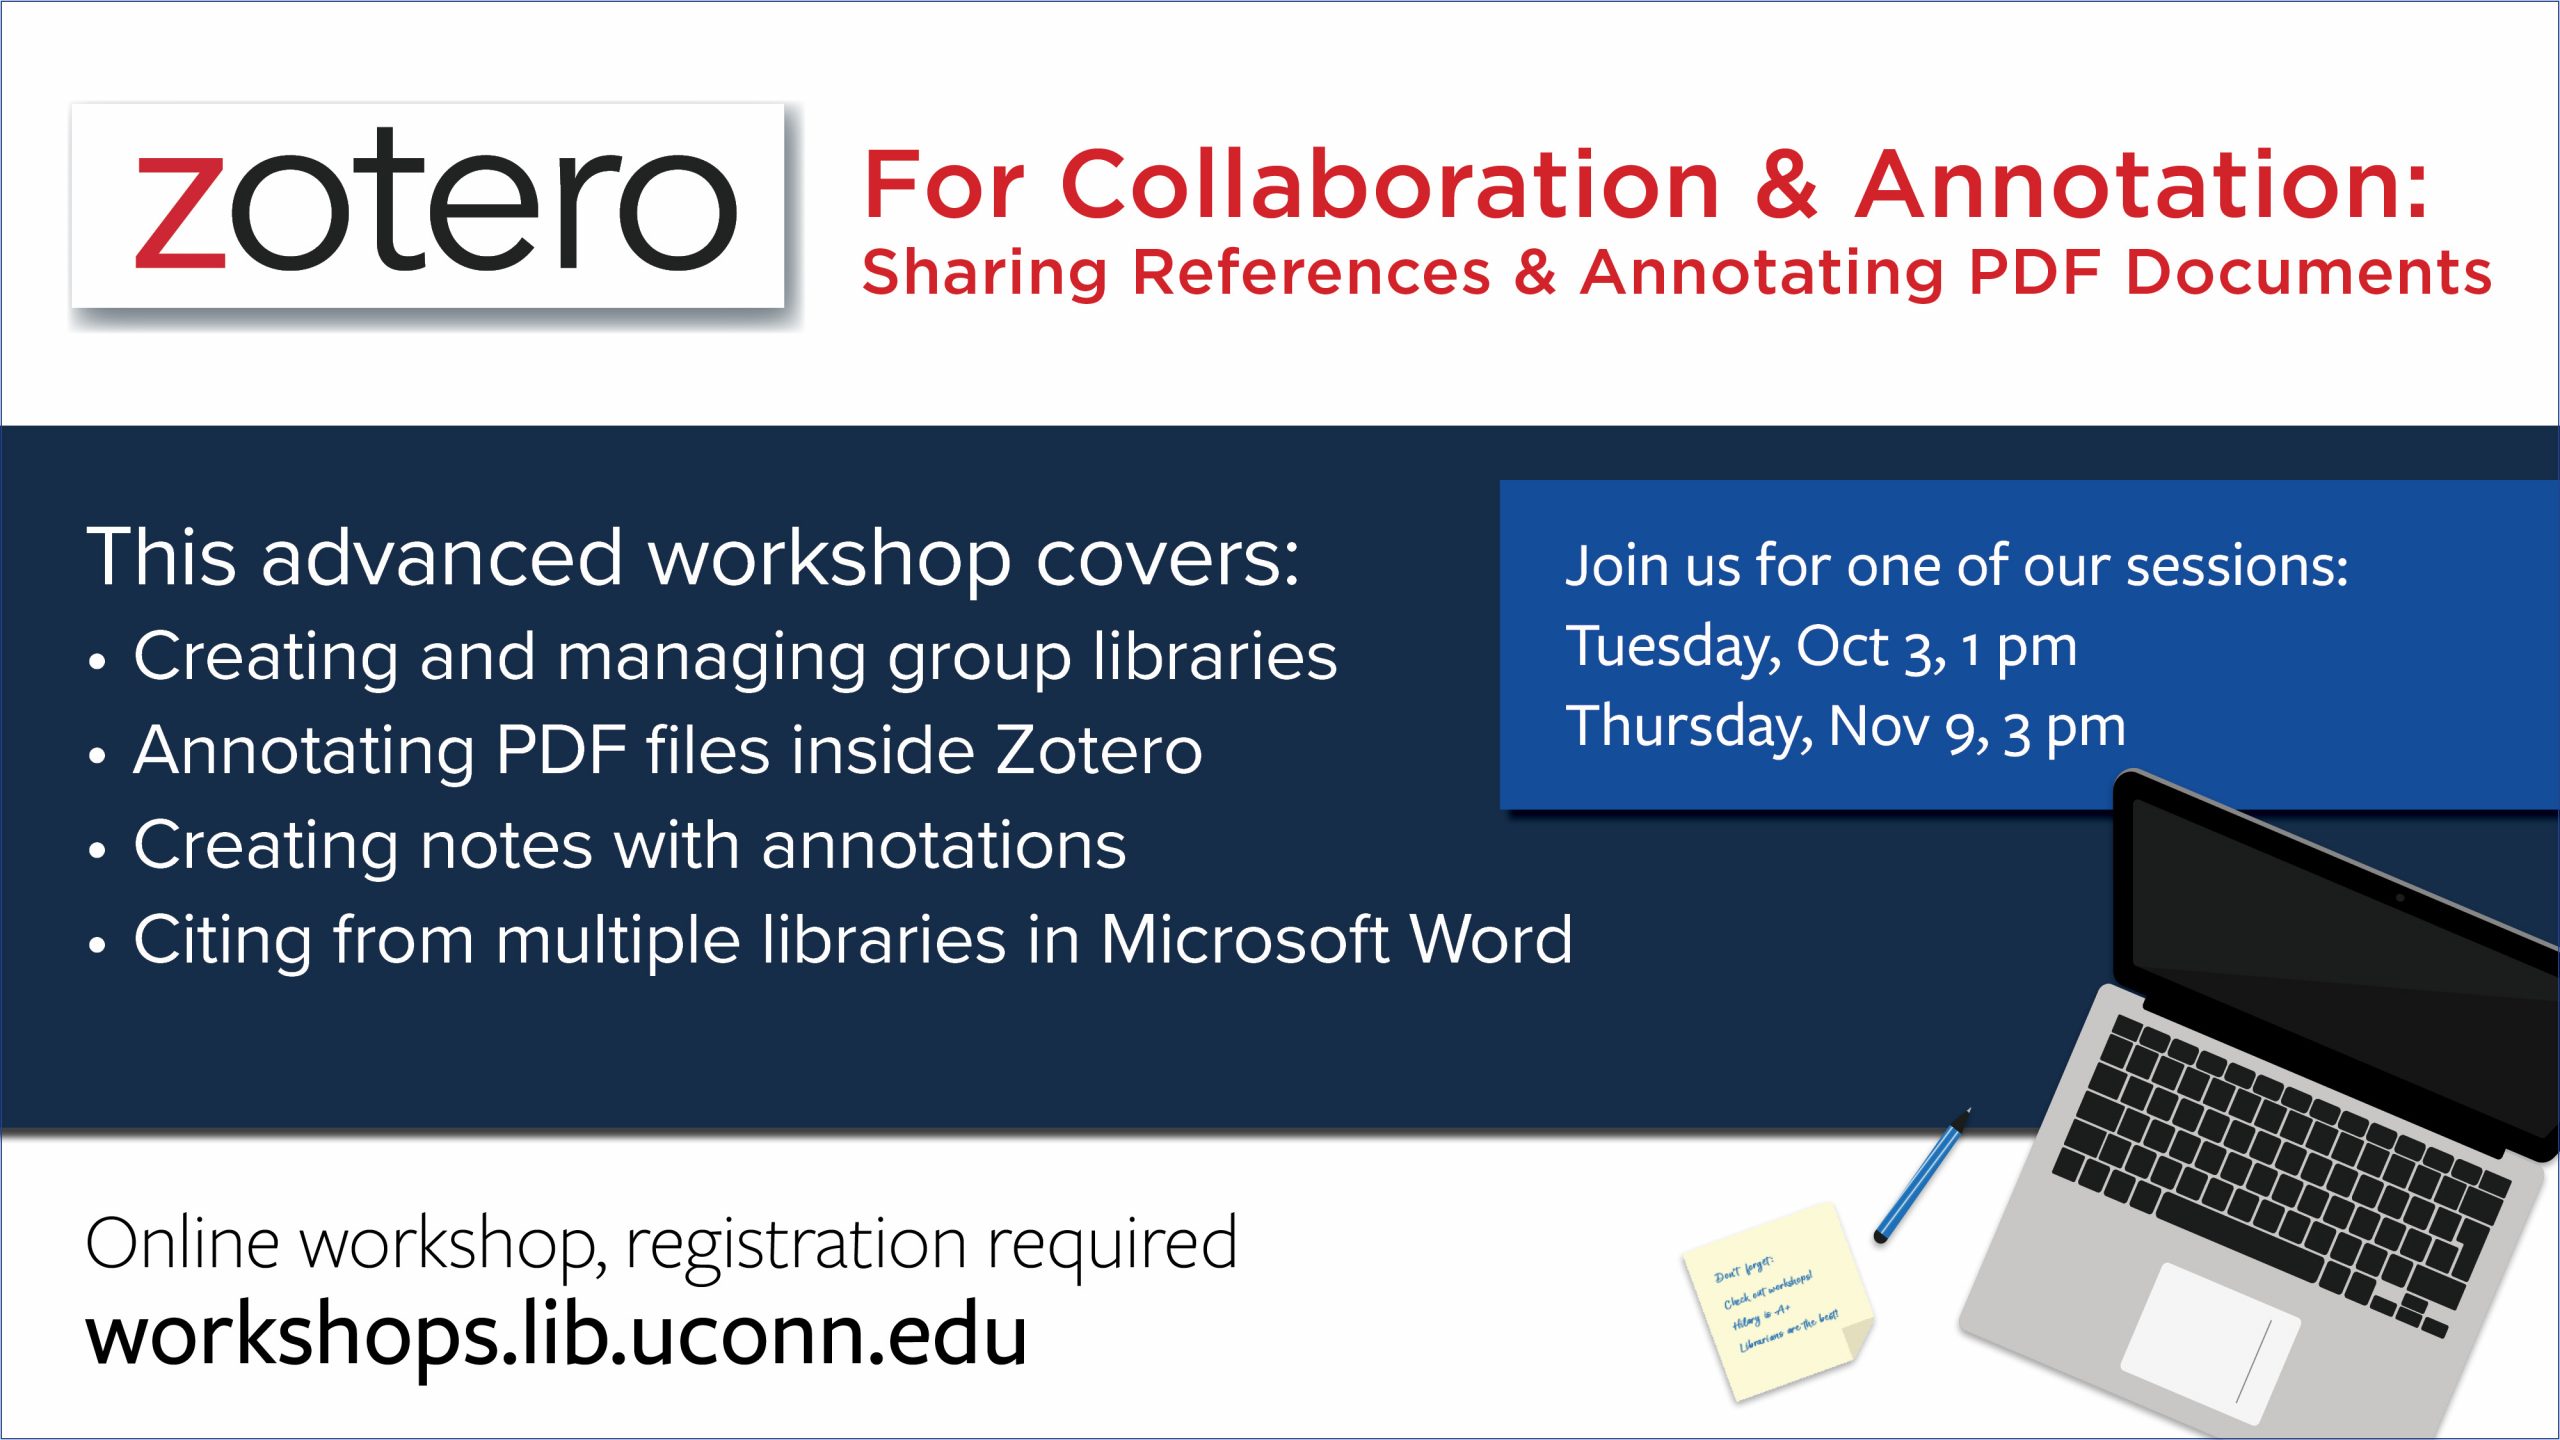 Online Workshop: Zotero for Collaboration and Annotation. Learn more at workshops.lib.uconn.edu